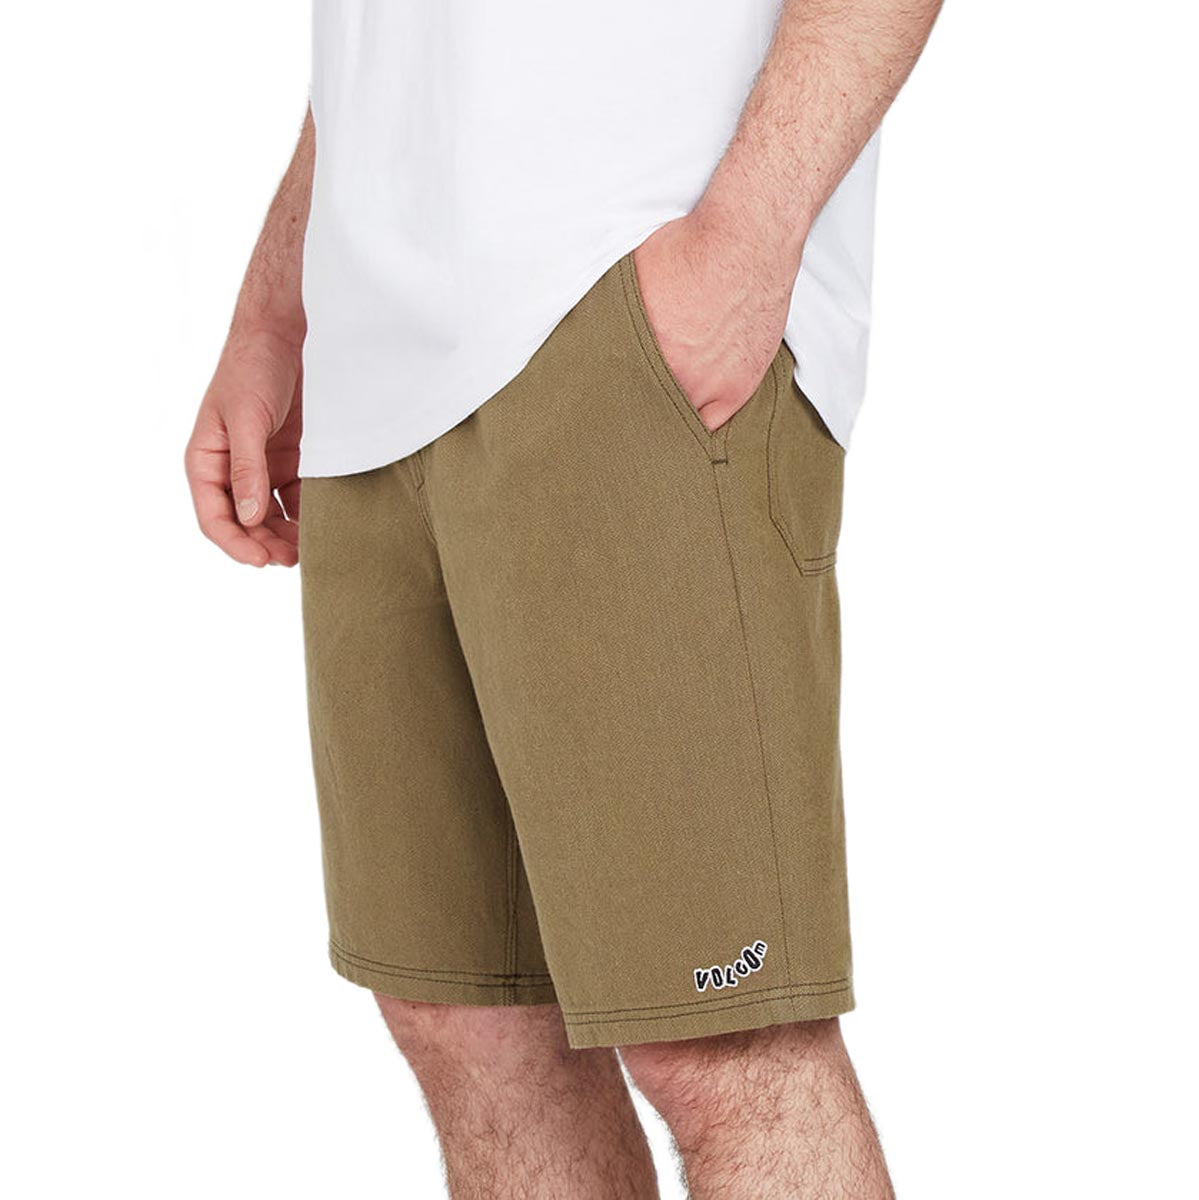 Volcom Outer Spaced Shorts - Old Mill image 3